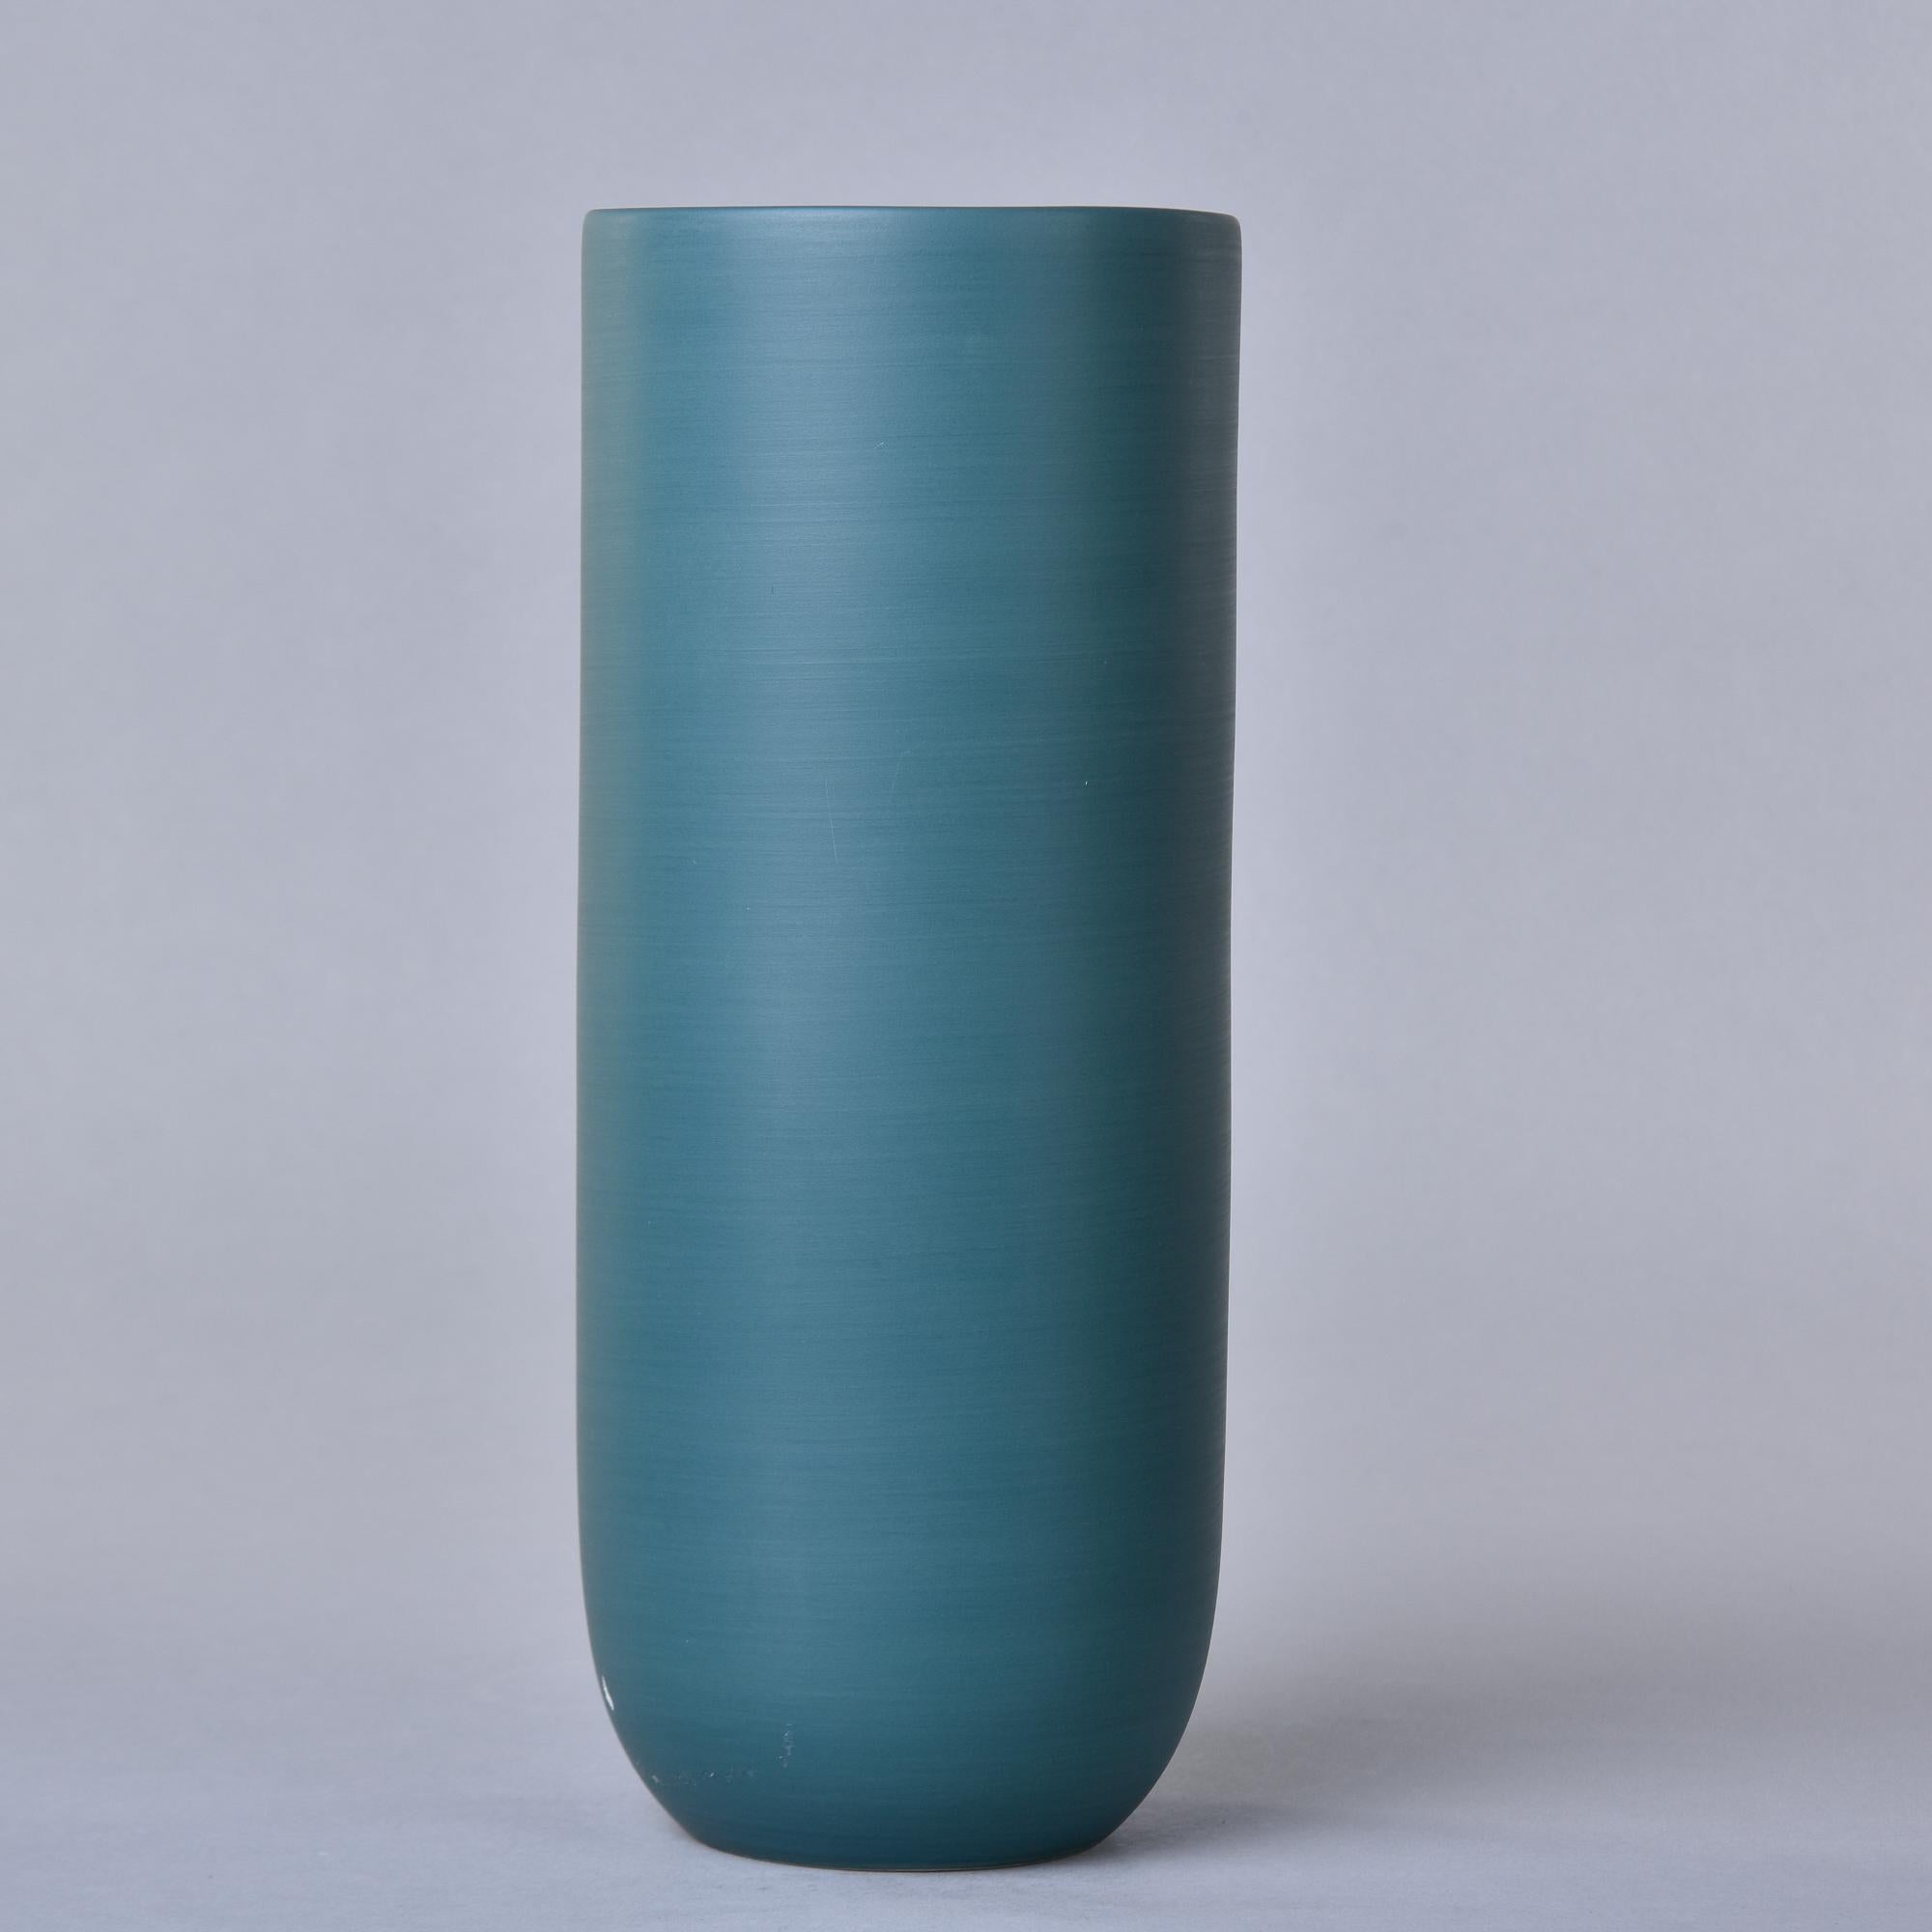 New Rina Menardi Canna 1 Vase in Mint In New Condition For Sale In Troy, MI